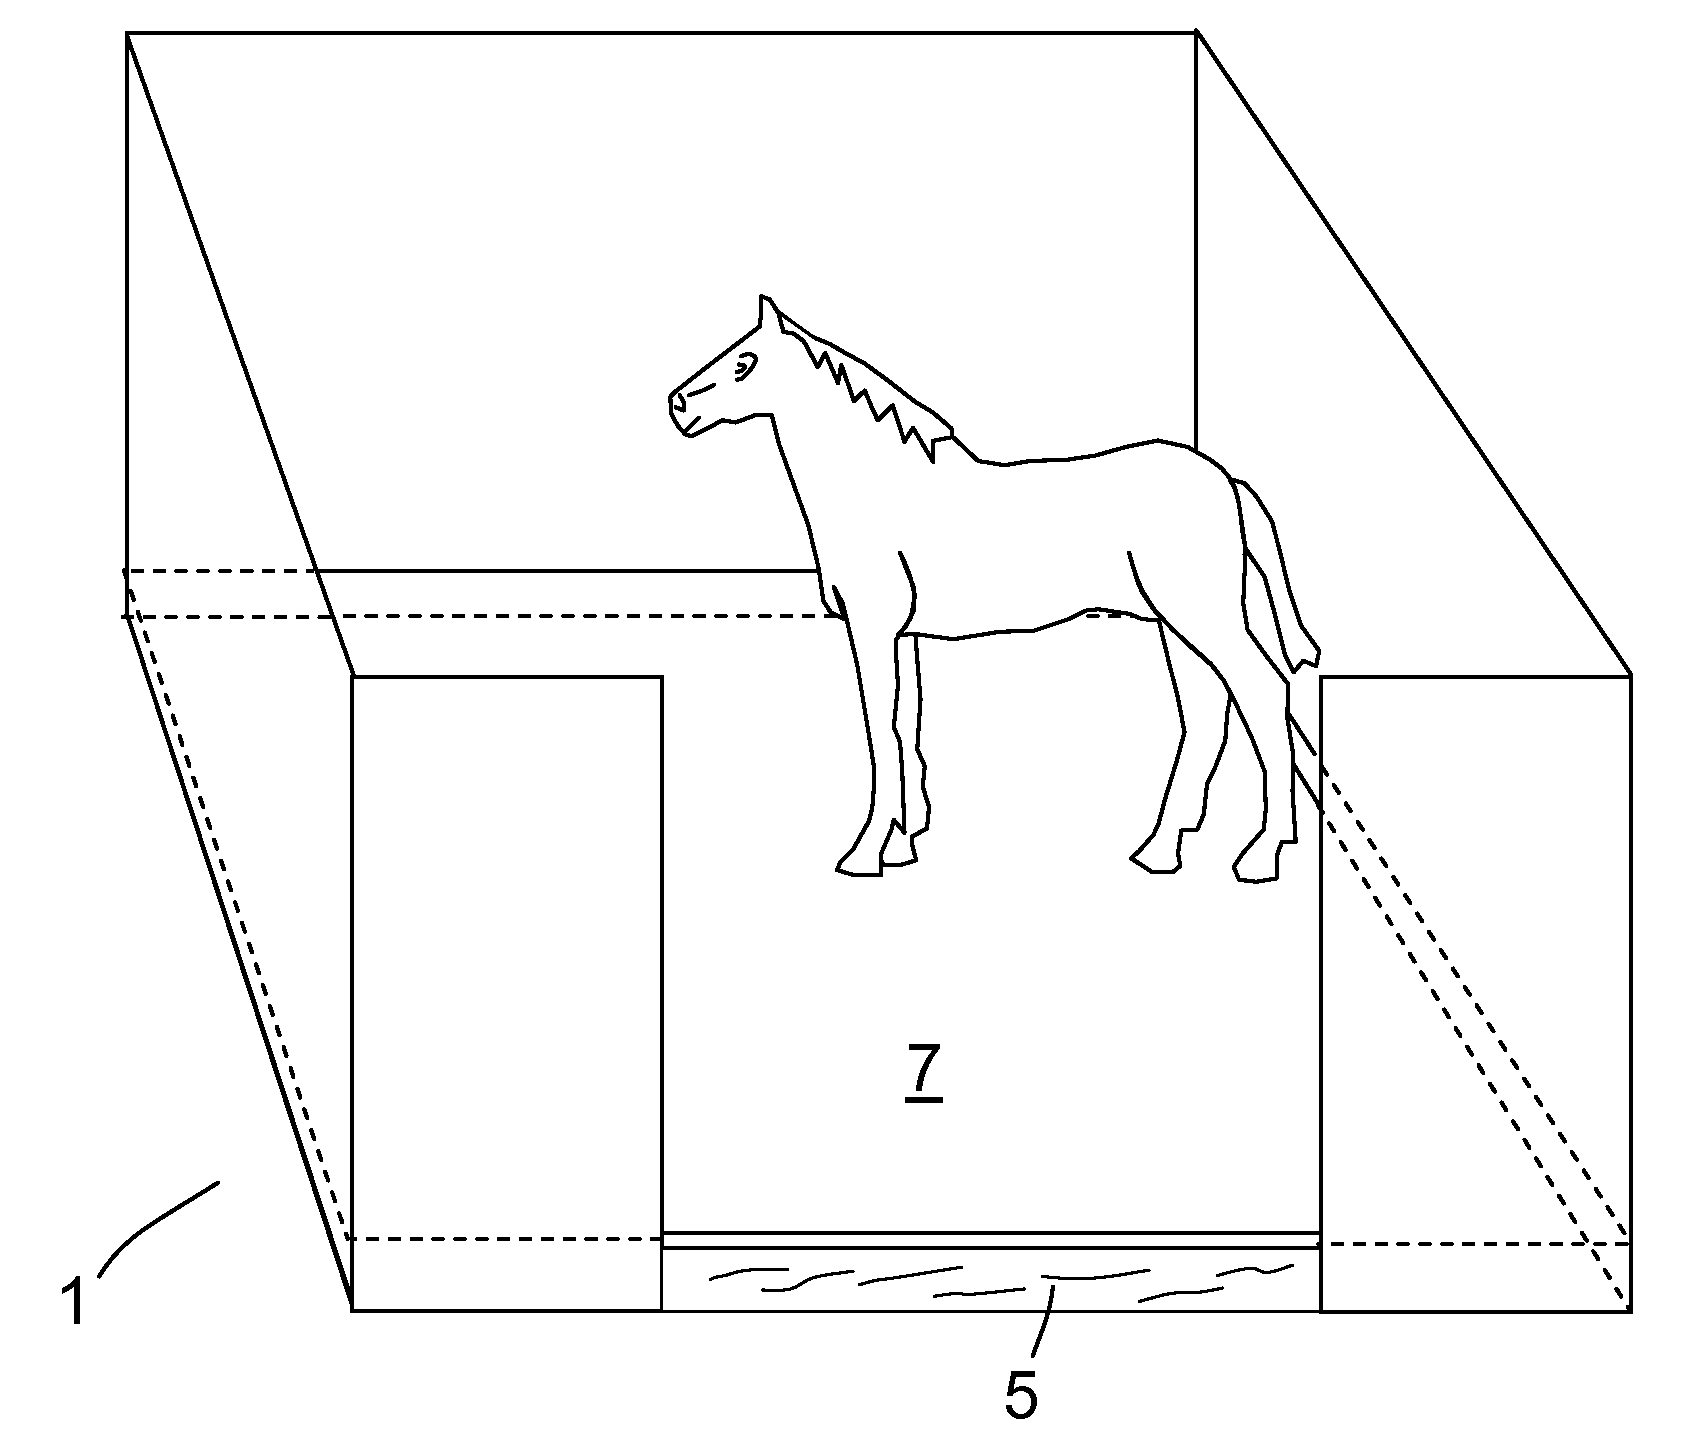 Horse Bedding Product and Method